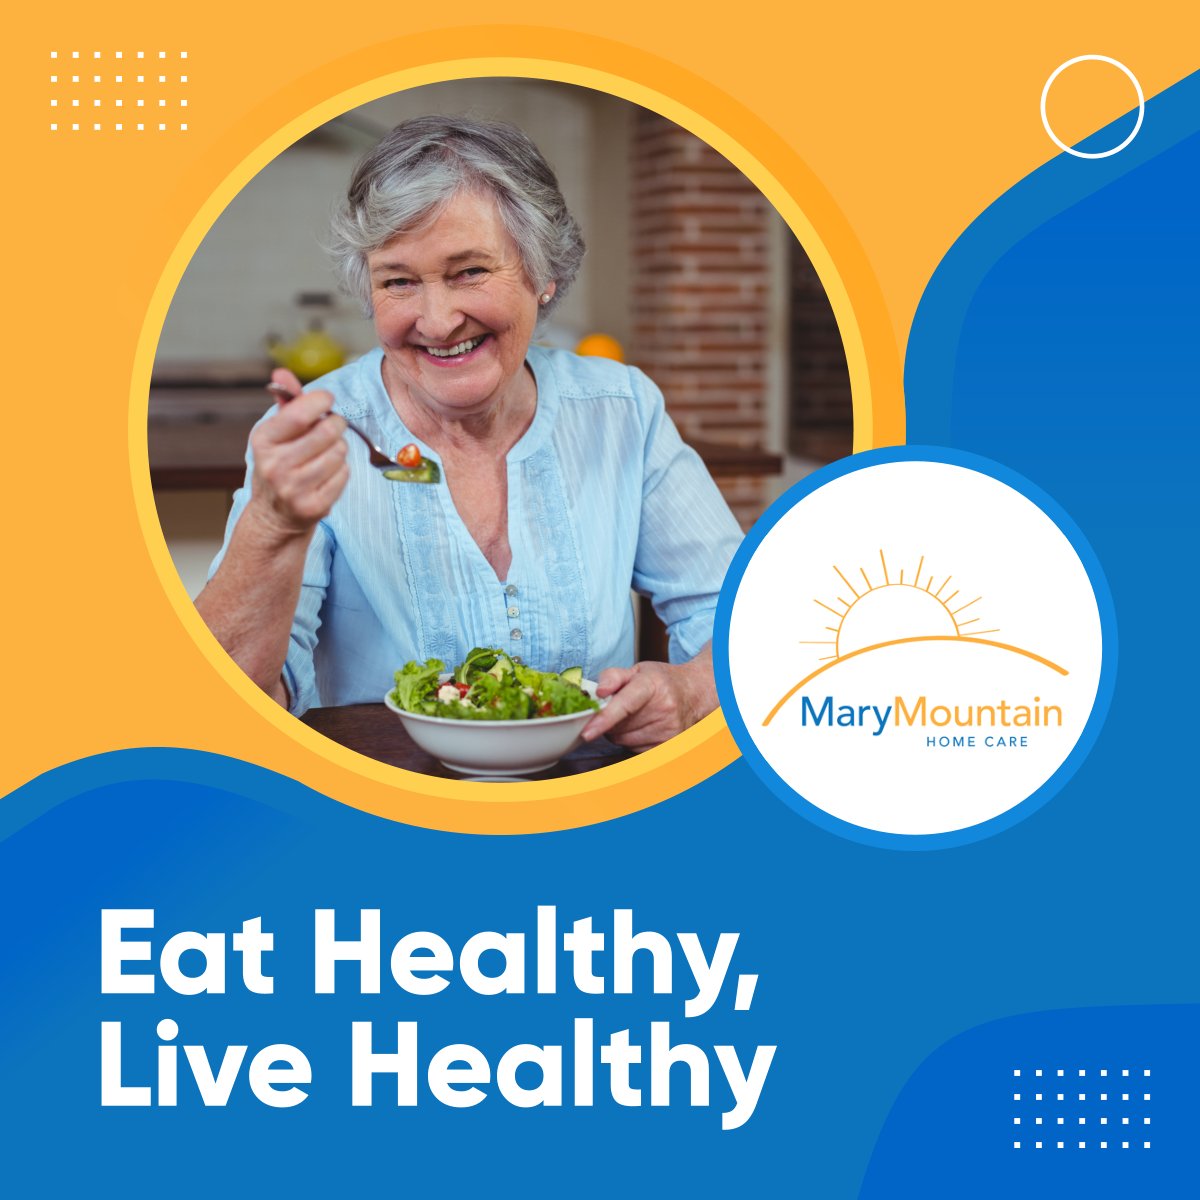 Eating the proper foods can help you maintain the appropriate weight and avoid unnecessary health problems such as hypertension, high cholesterol, and diabetes.

#EatHealthy #LiveHealthy #HomeCareServices #LosAngelesCA